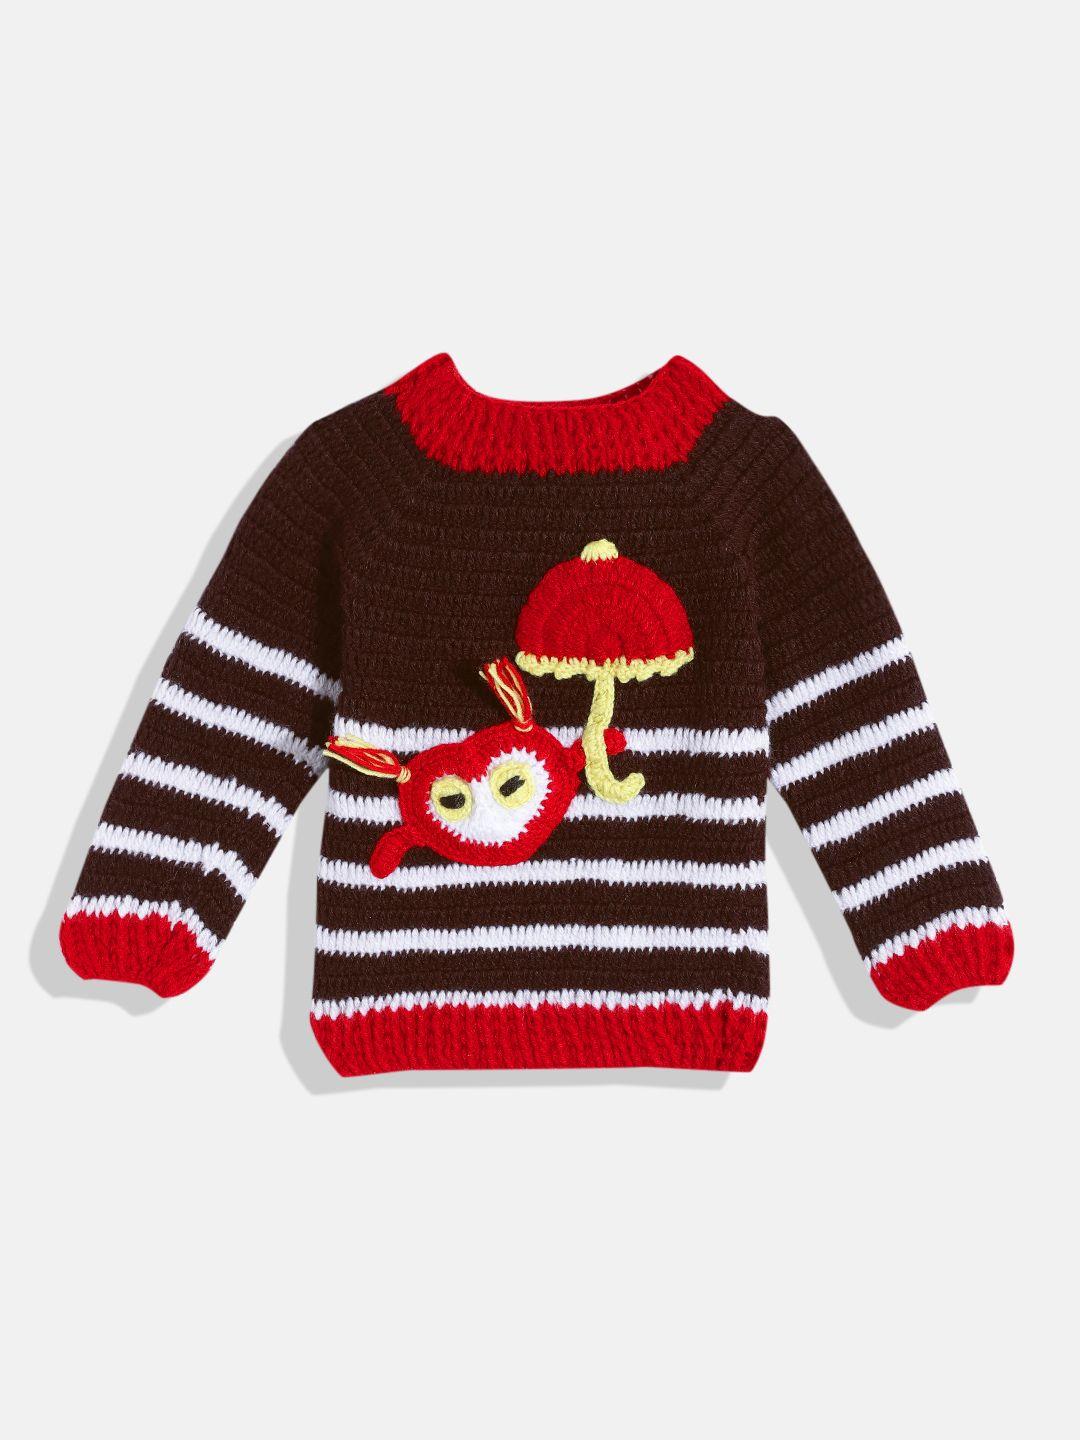 chutput-unisex-kids-brown-&-red-striped-pullover-with-applique-detail